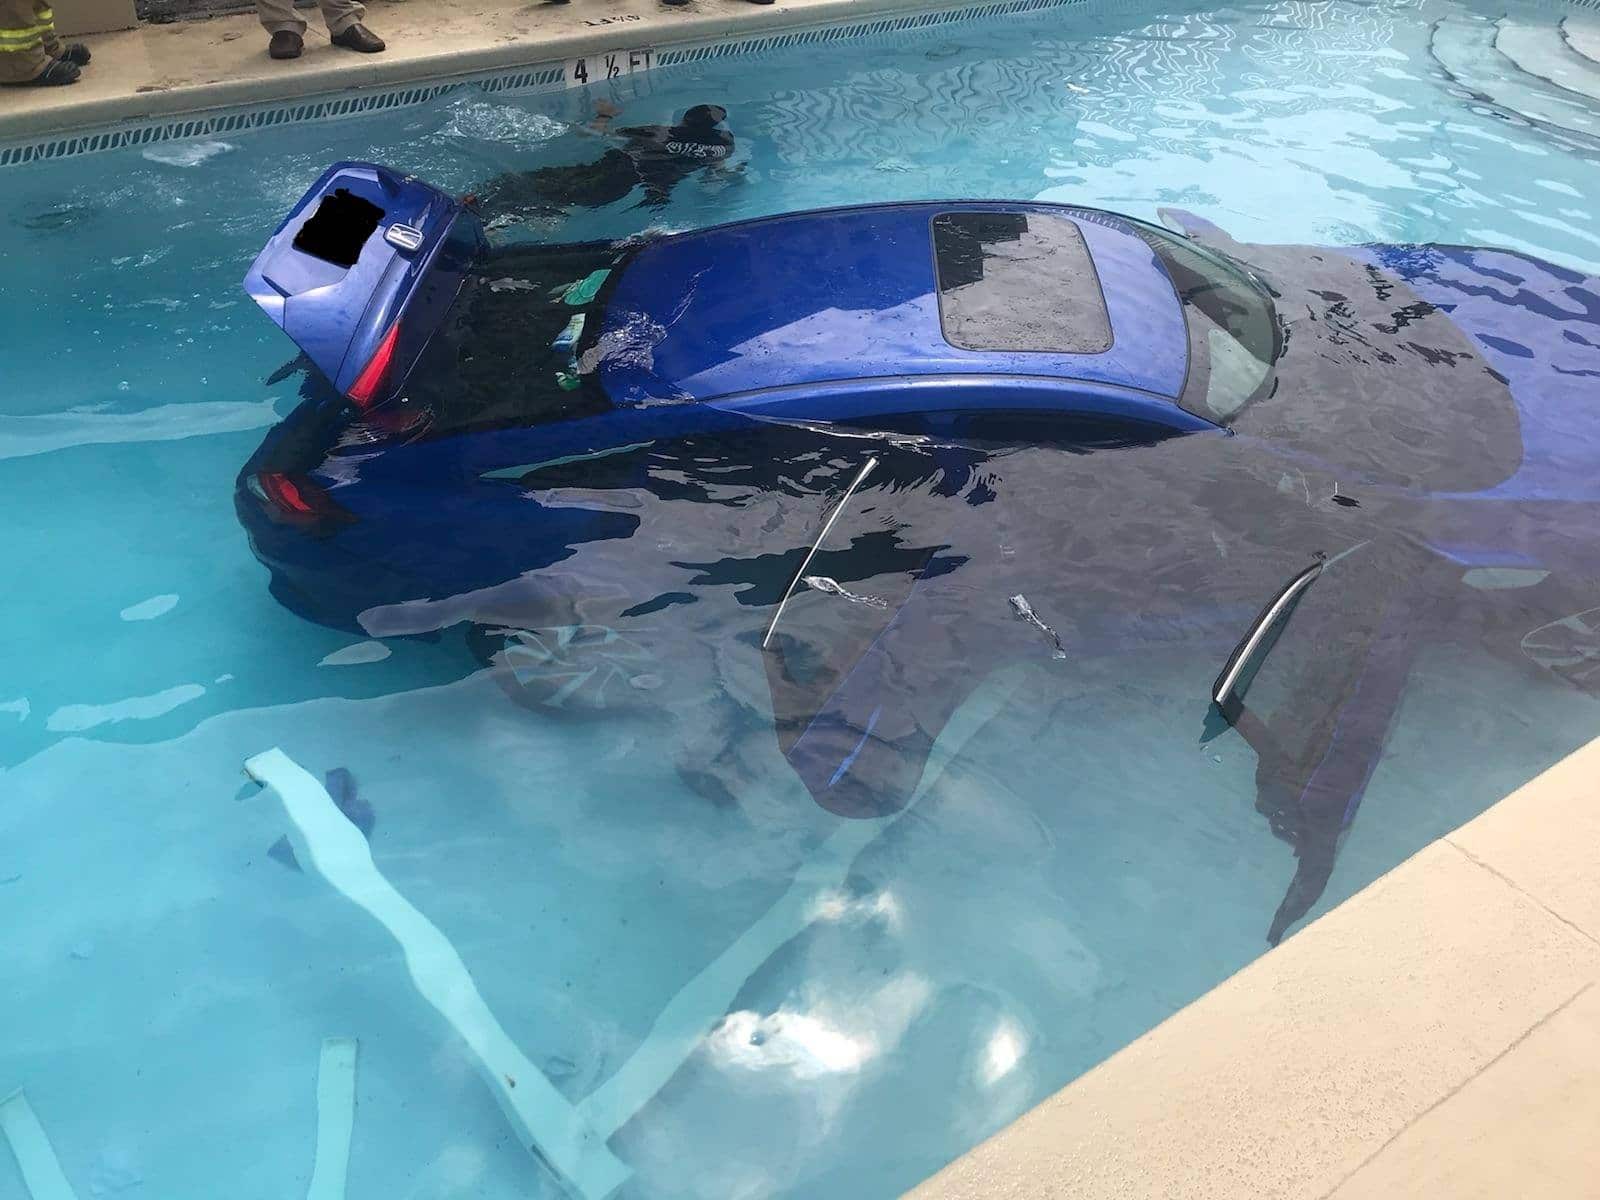 women forgets to park carlater found in pool